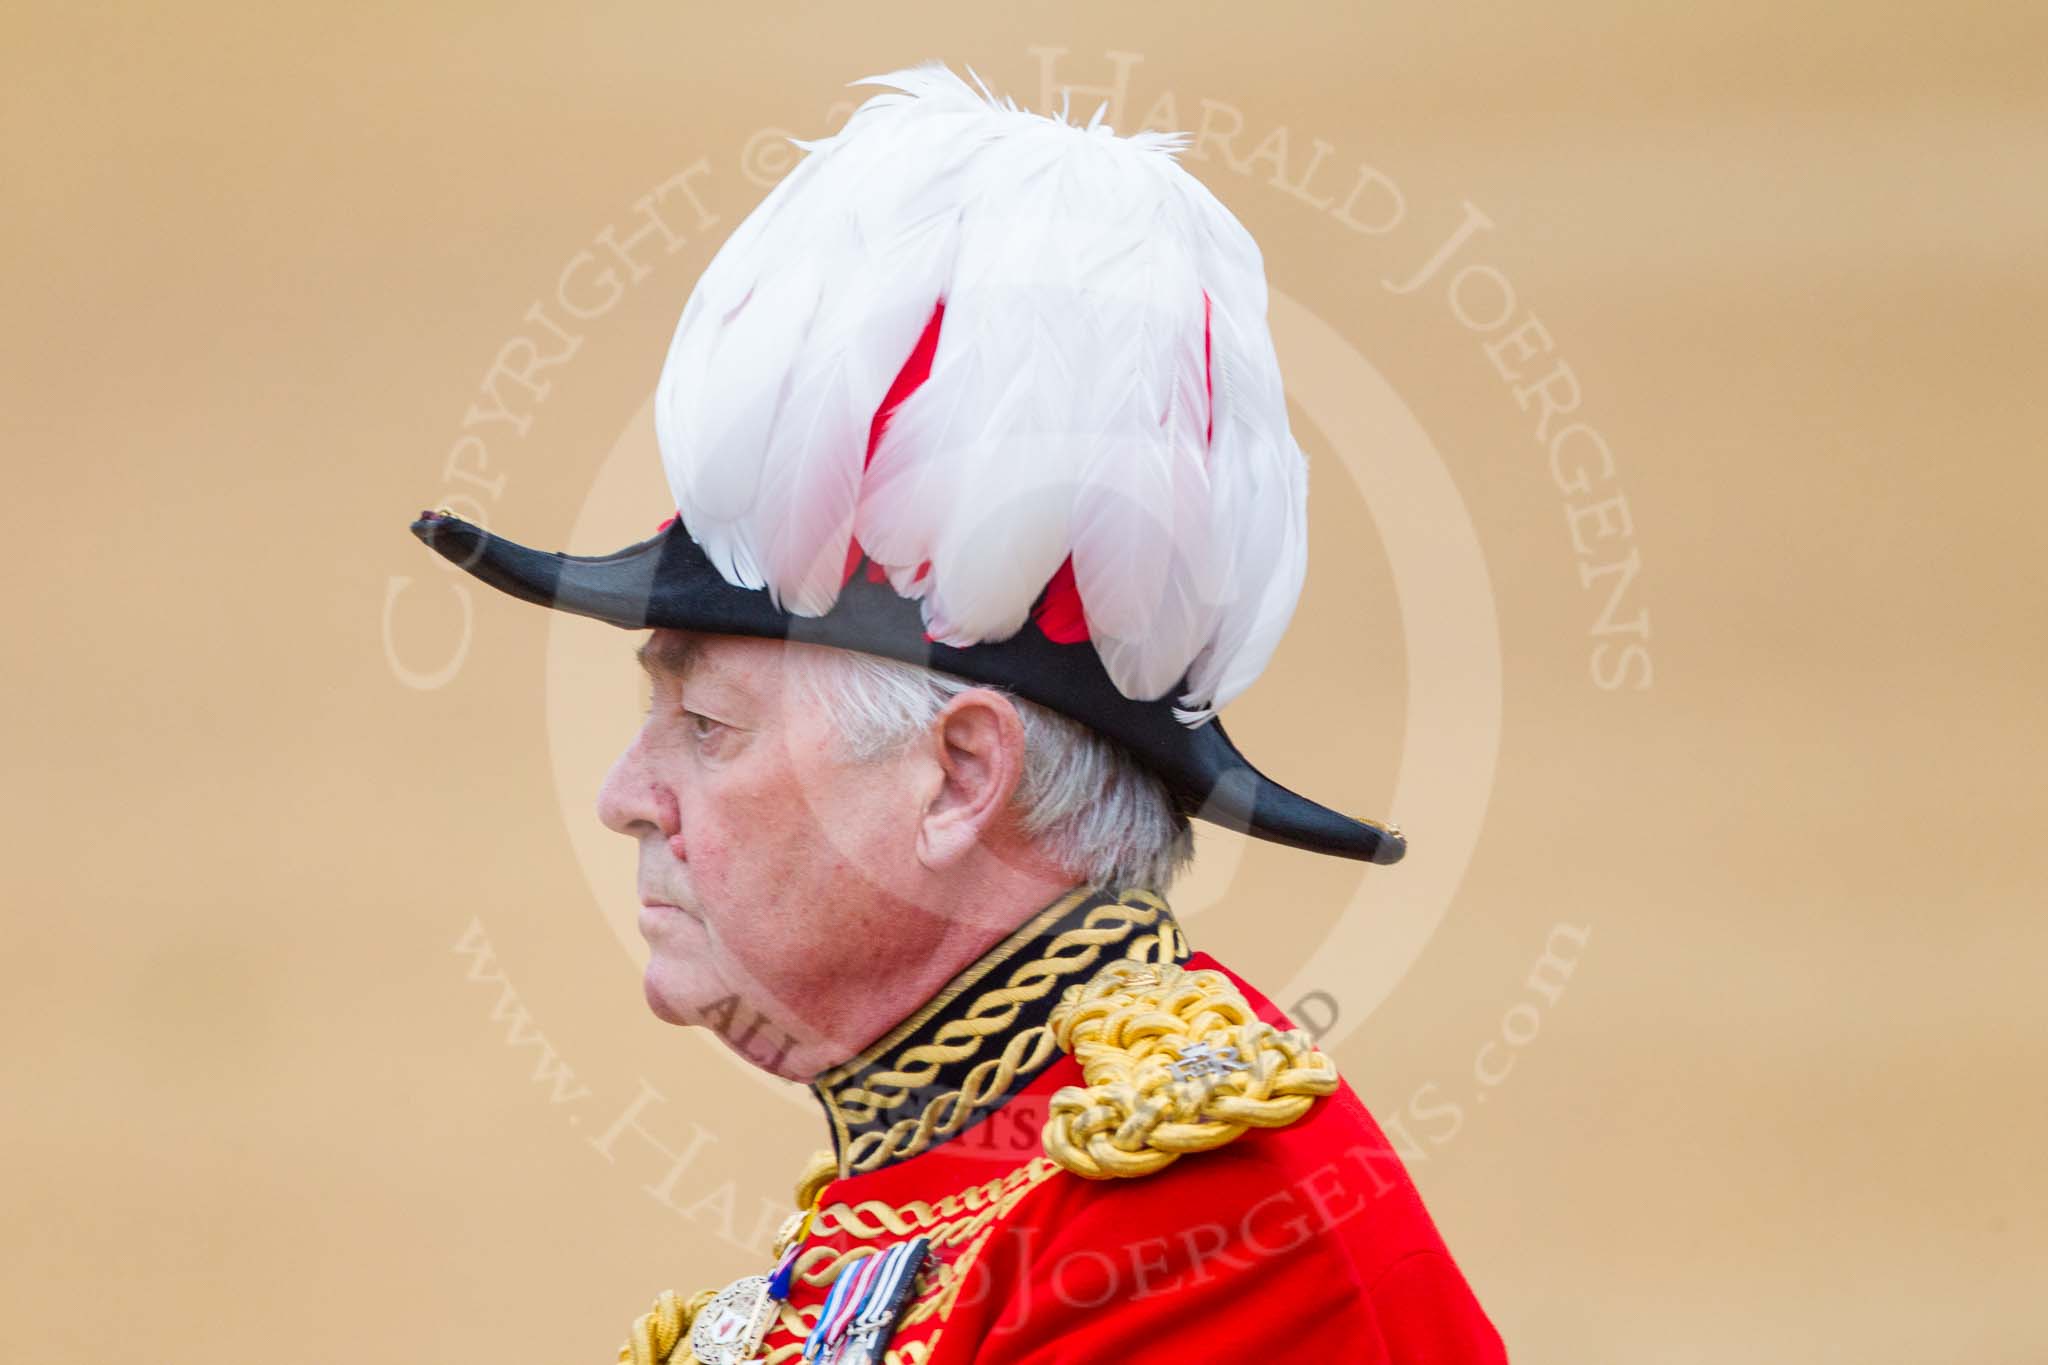 Trooping the Colour 2015. Image #265, 13 June 2015 11:00 Horse Guards Parade, London, UK